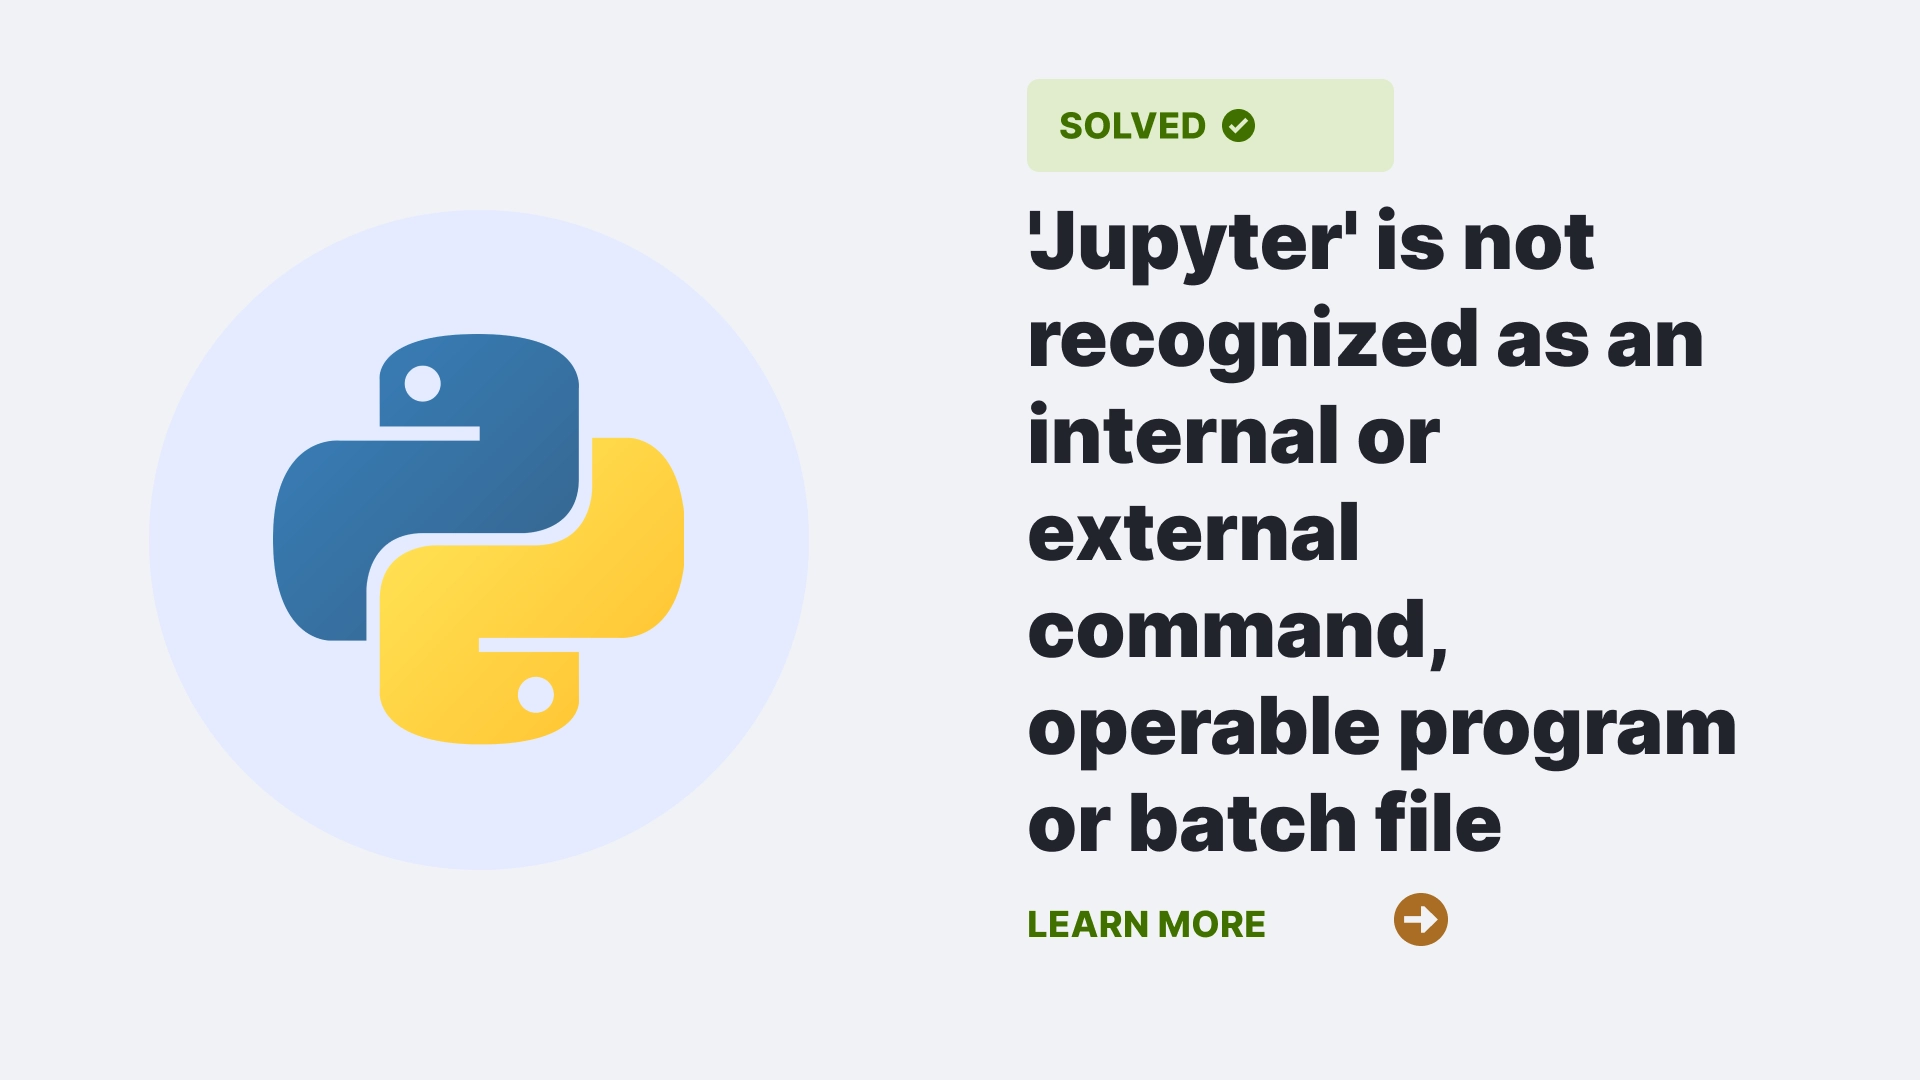 'Jupyter' is not recognized as an internal or external command, operable program or batch file